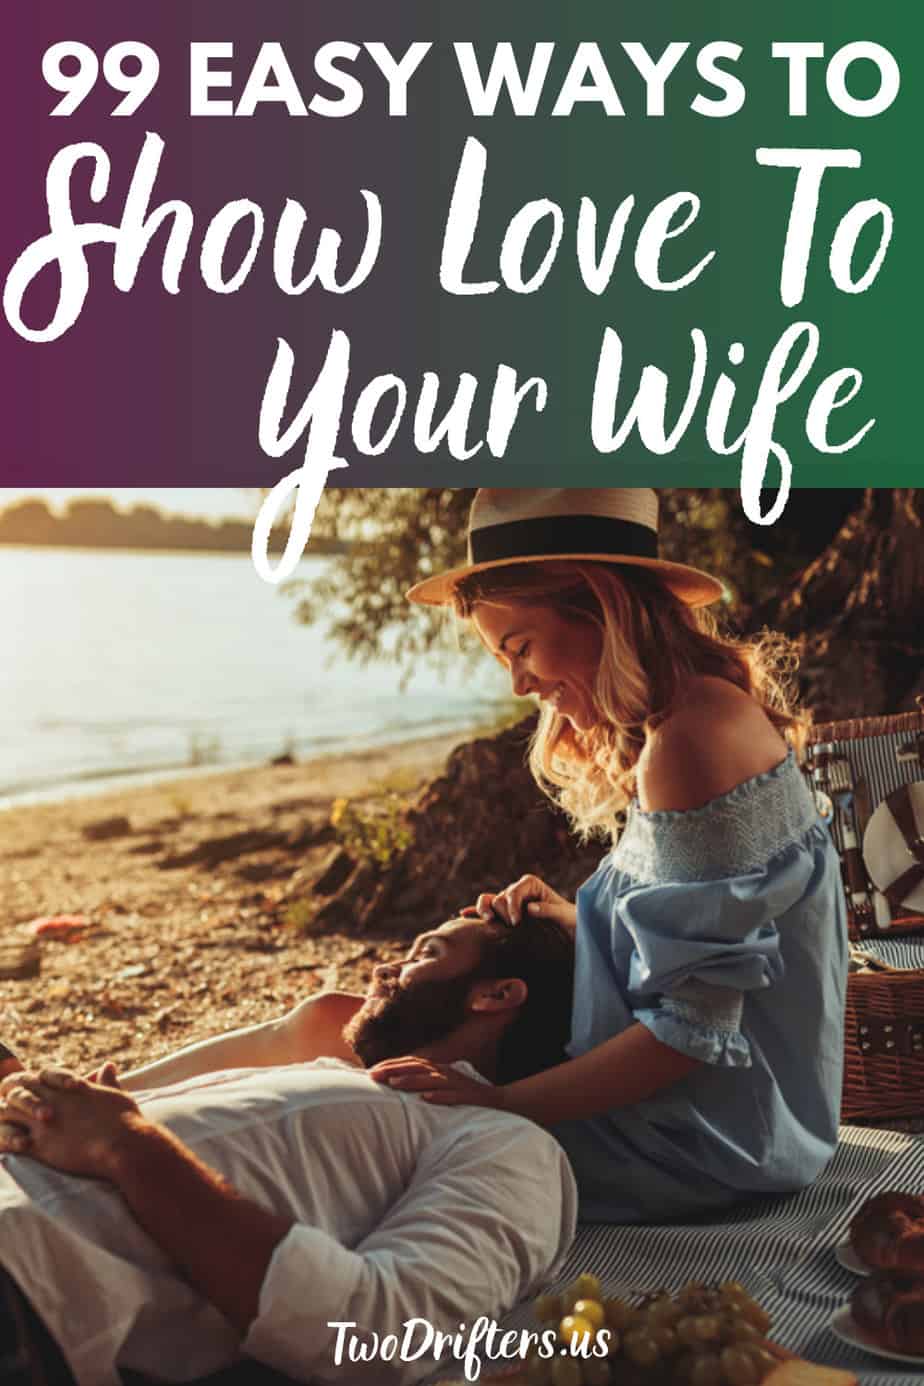 Pinterest social share image that says "99 Easy Ways to Show Love to Your Wife."